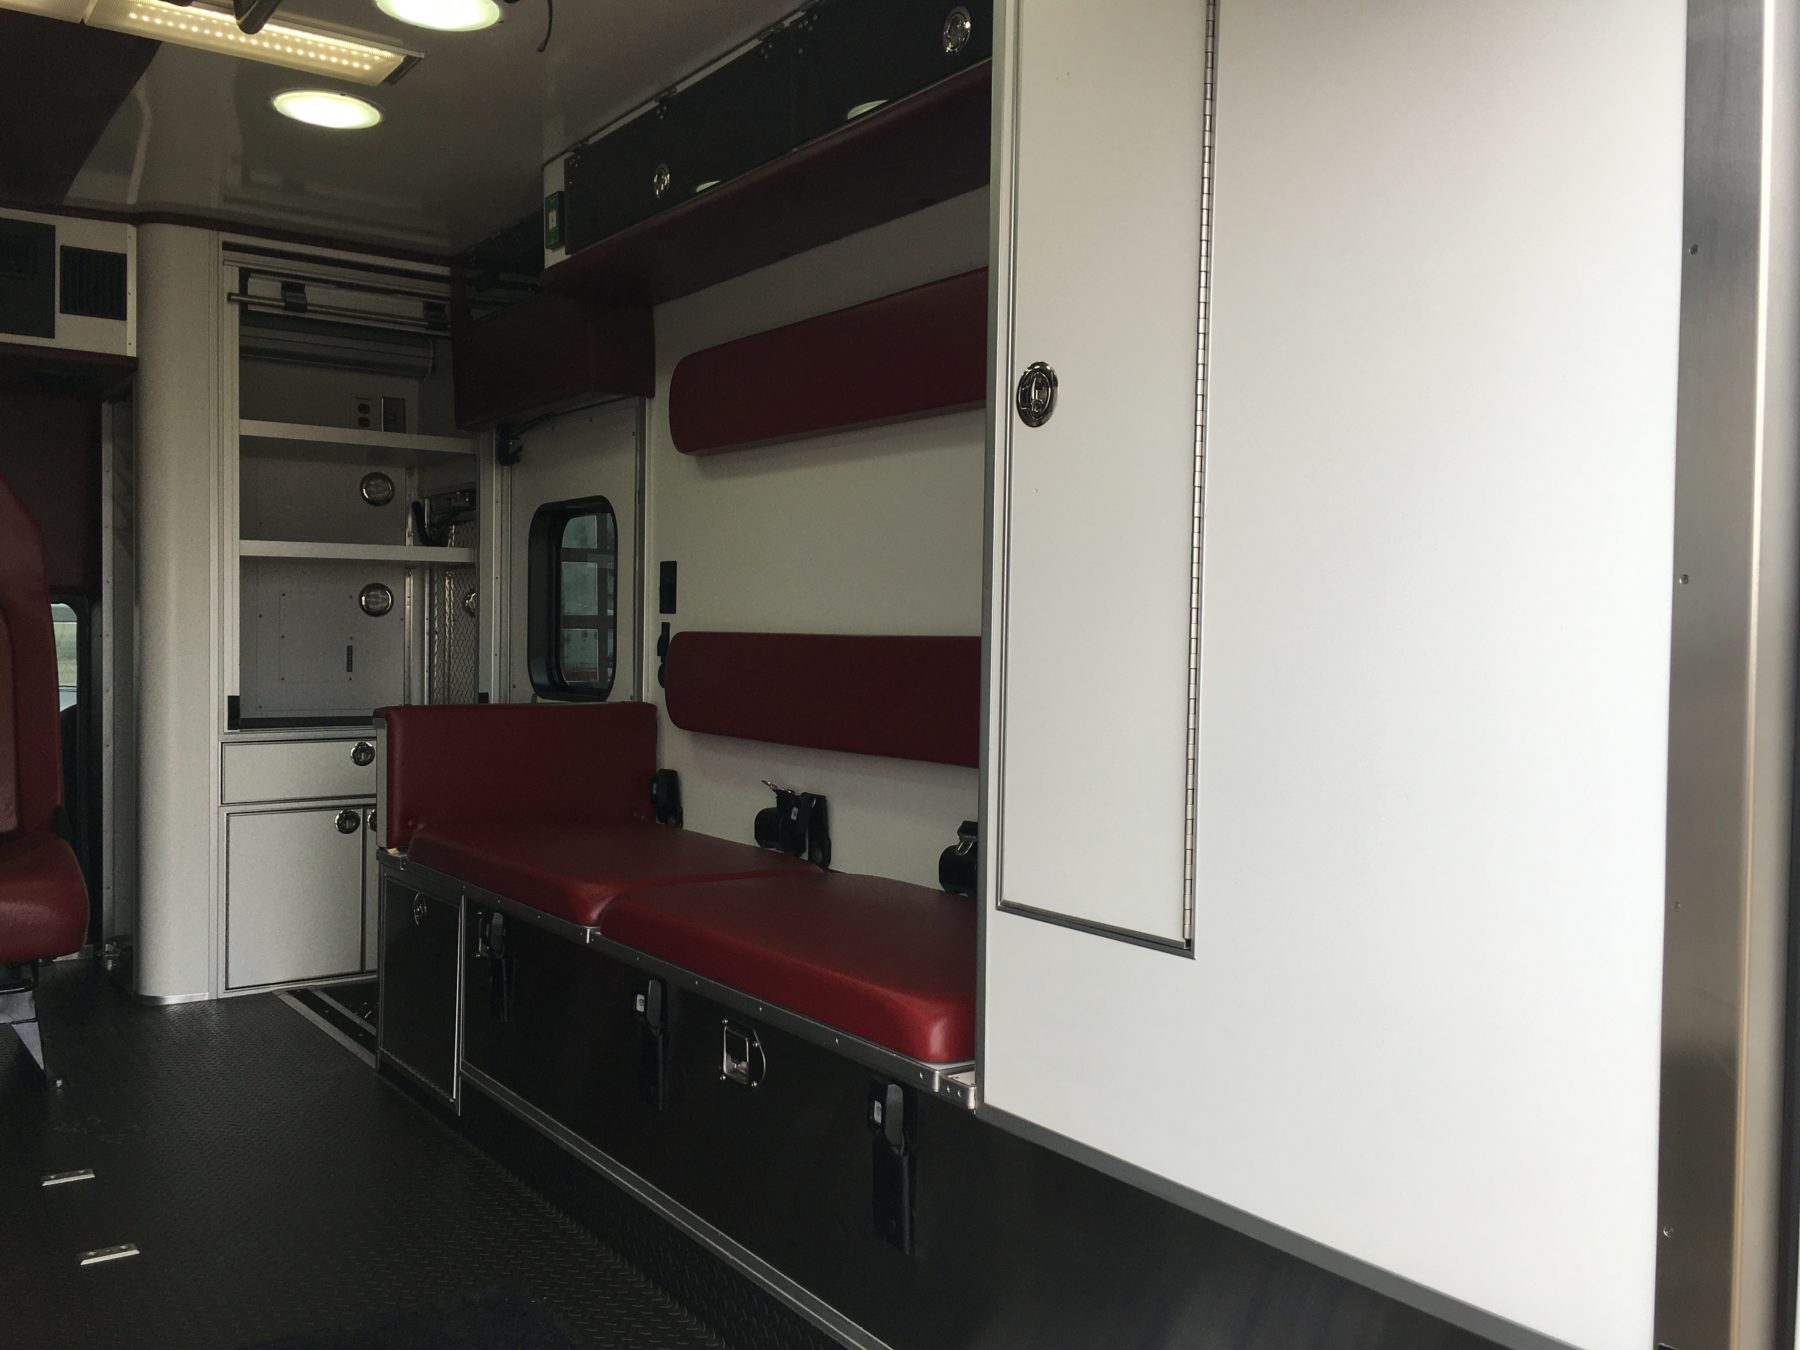 2020 Ford F450 4x4 Heavy Duty Ambulance For Sale – Picture 12